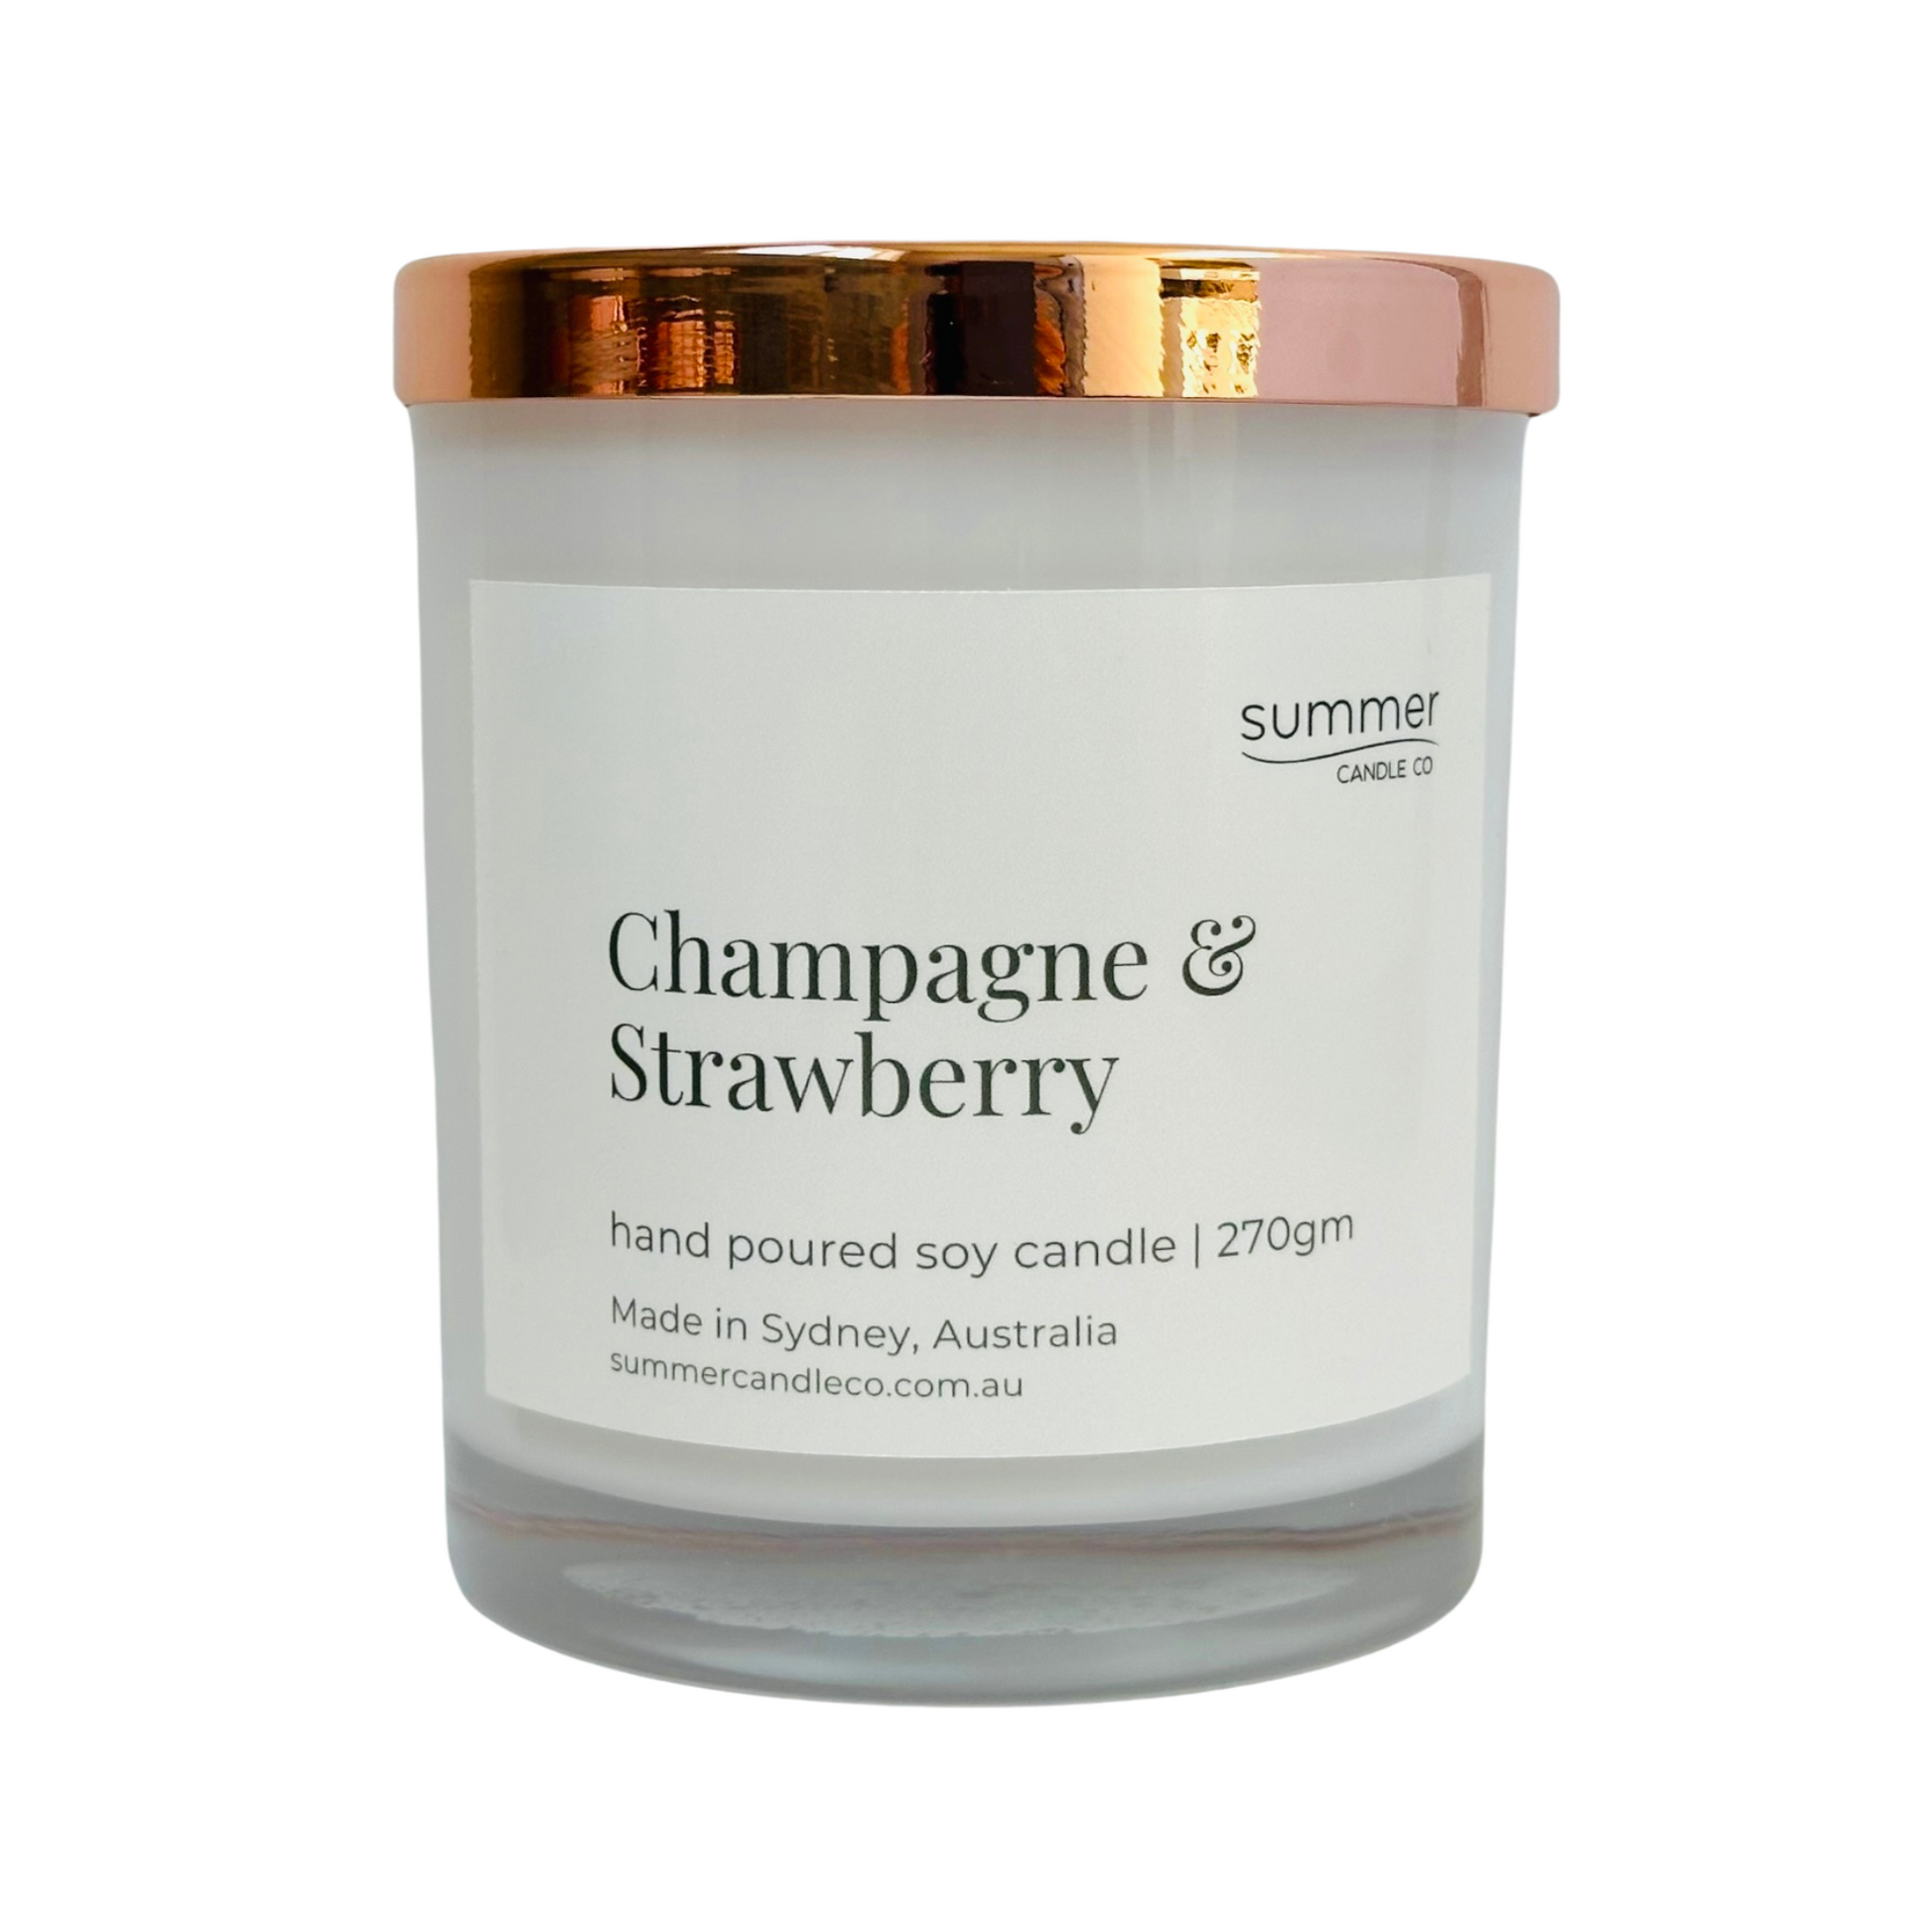 Lovely Hand Poured Soy Candle 270gram Fragrance of Champagne & Strawberry